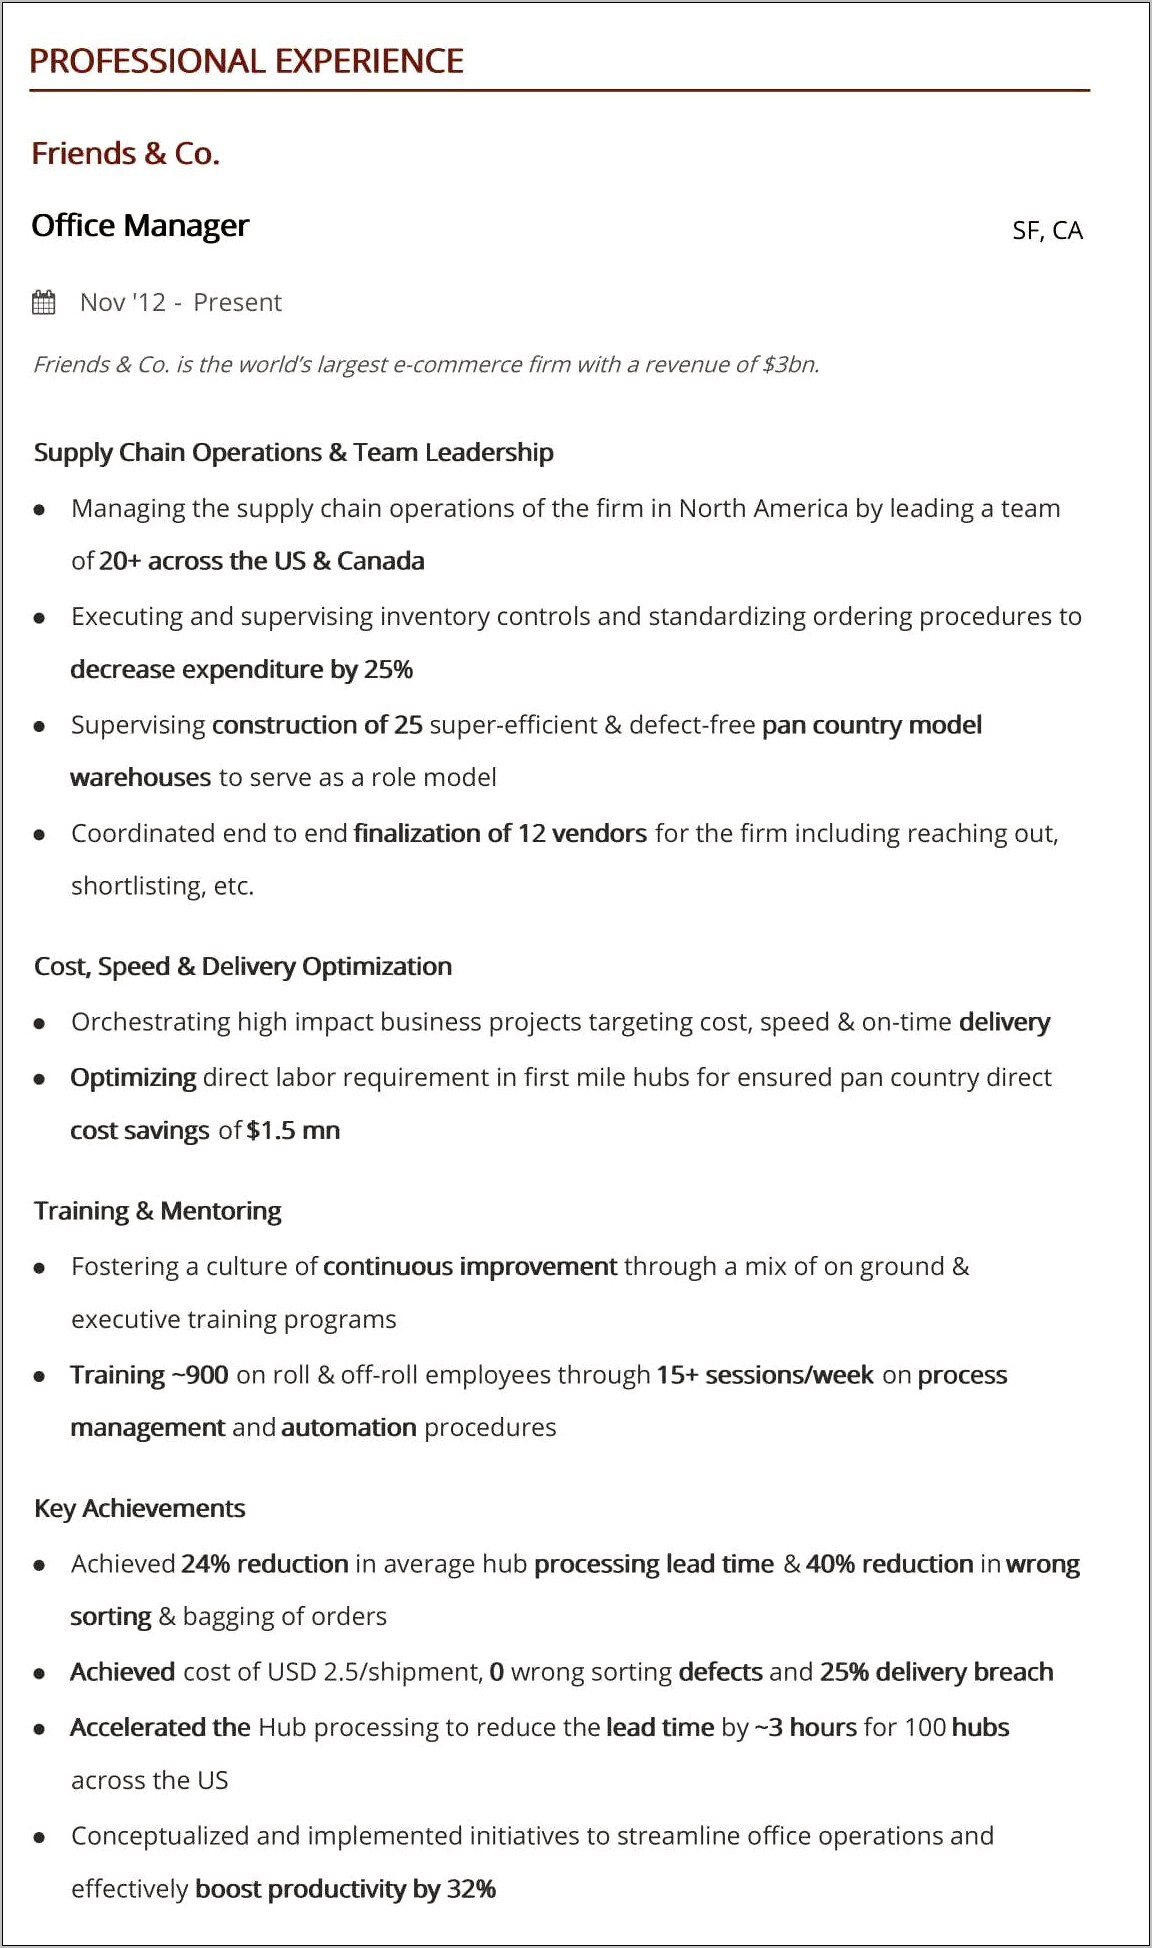 Construction Quality Control Manager Resume Charleston Sc